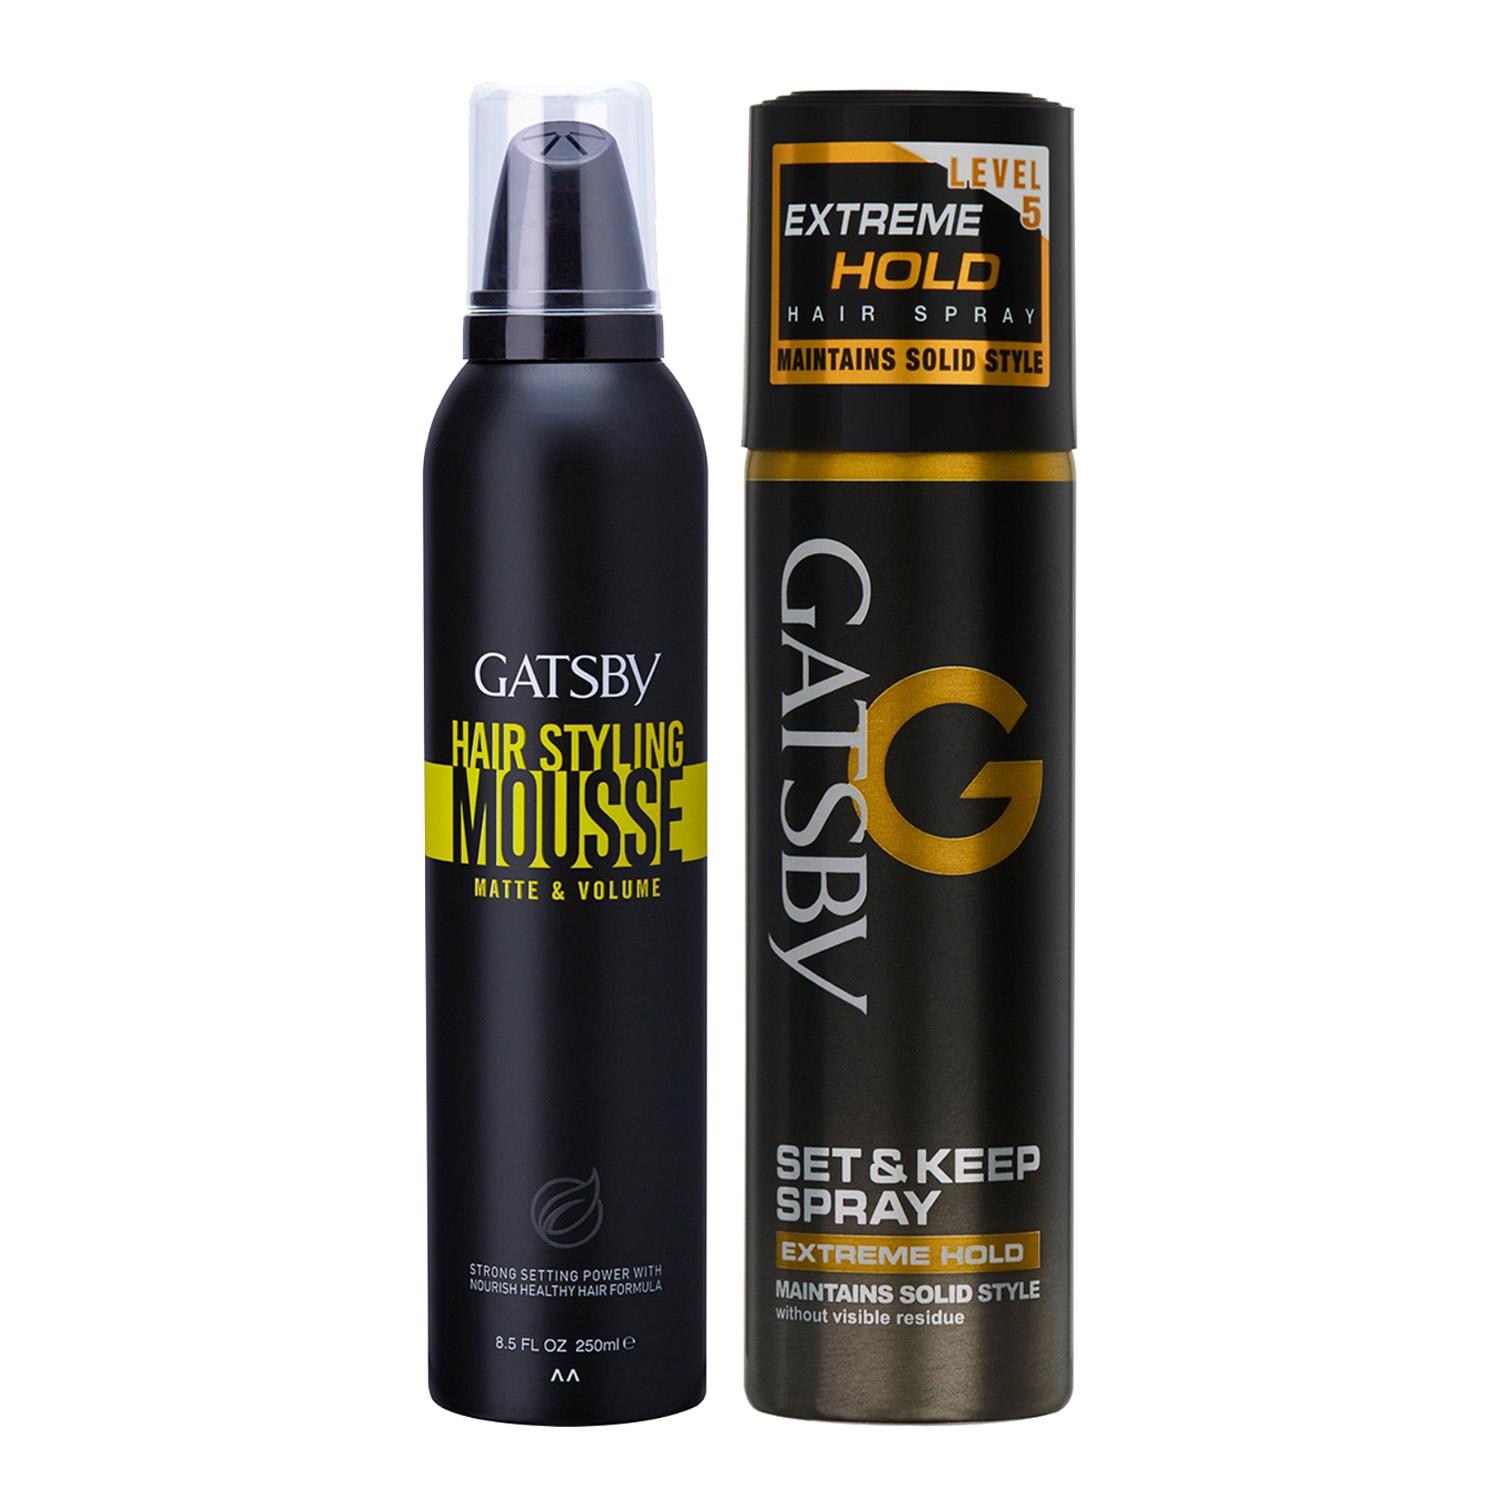 Gatsby | Gatsby Hair Styling Mousse (250 ml) & Extreme Hold Set Keep Hair Spray (66 ml) Combo